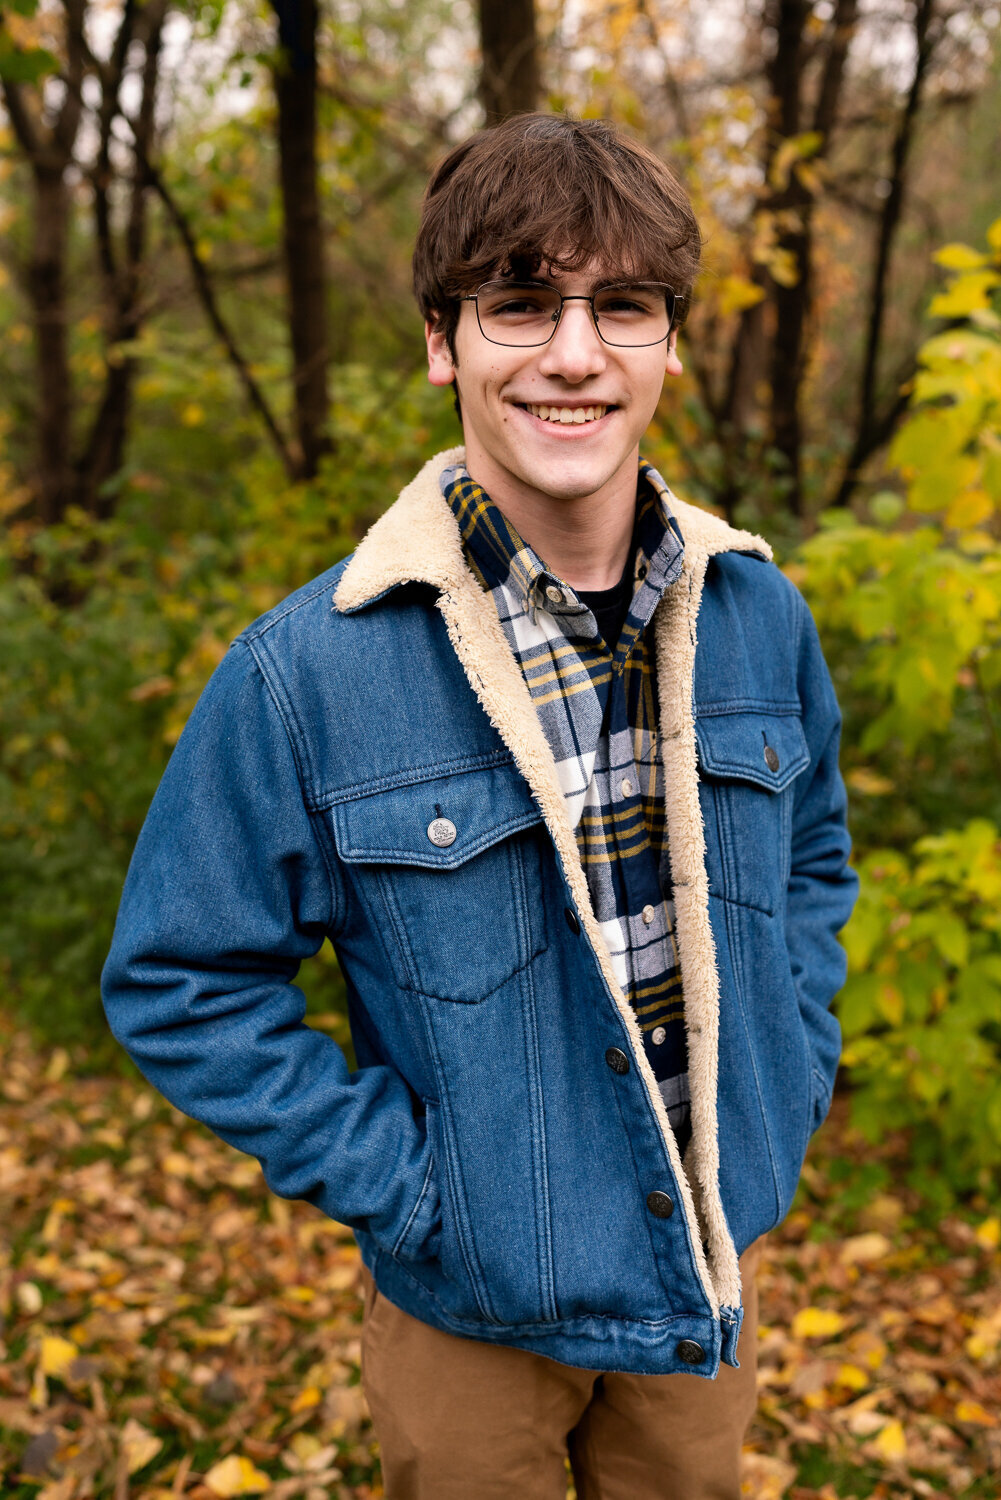 Senior boy with glasses dressed in a denim jacket smiles in front of the woods.